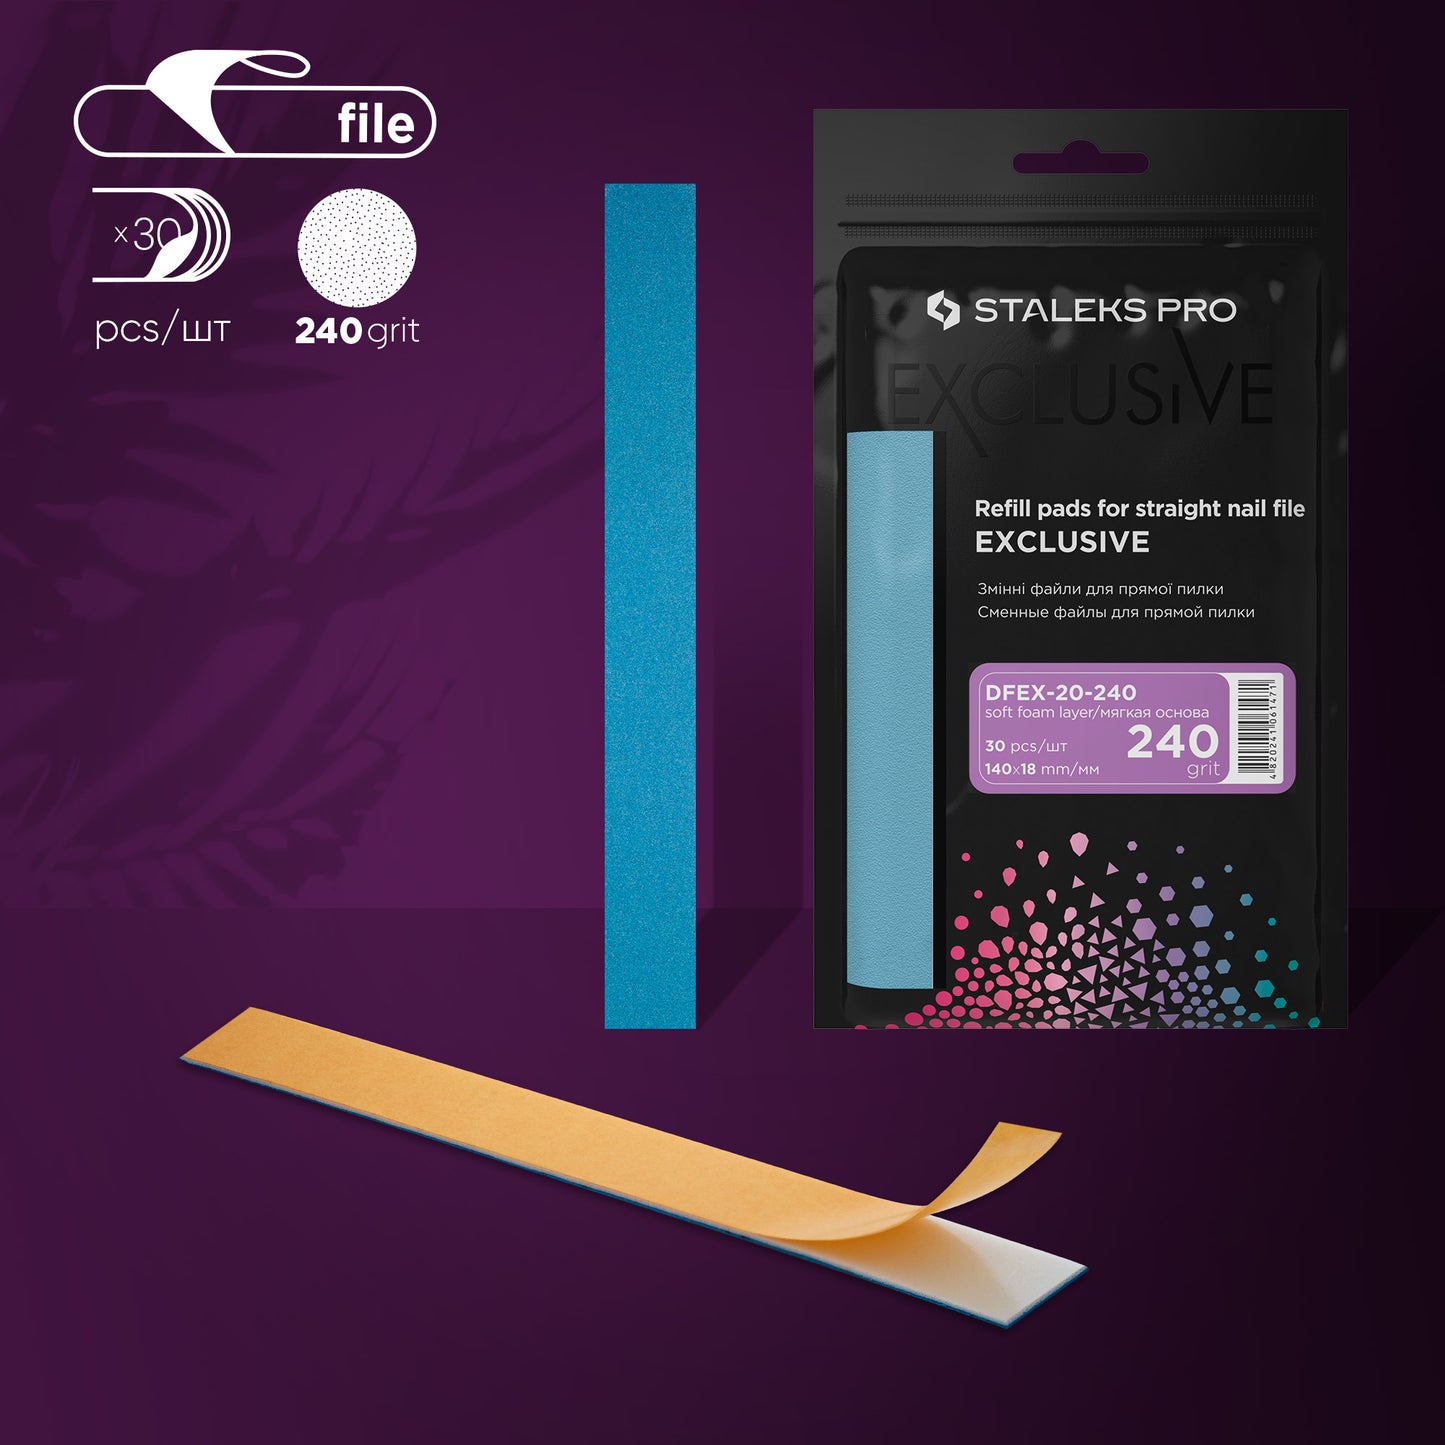 Disposable files for straight nail file (soft base) Staleks Pro Exclusive 20, 240 grit (30 pcs) DFEX-20-240